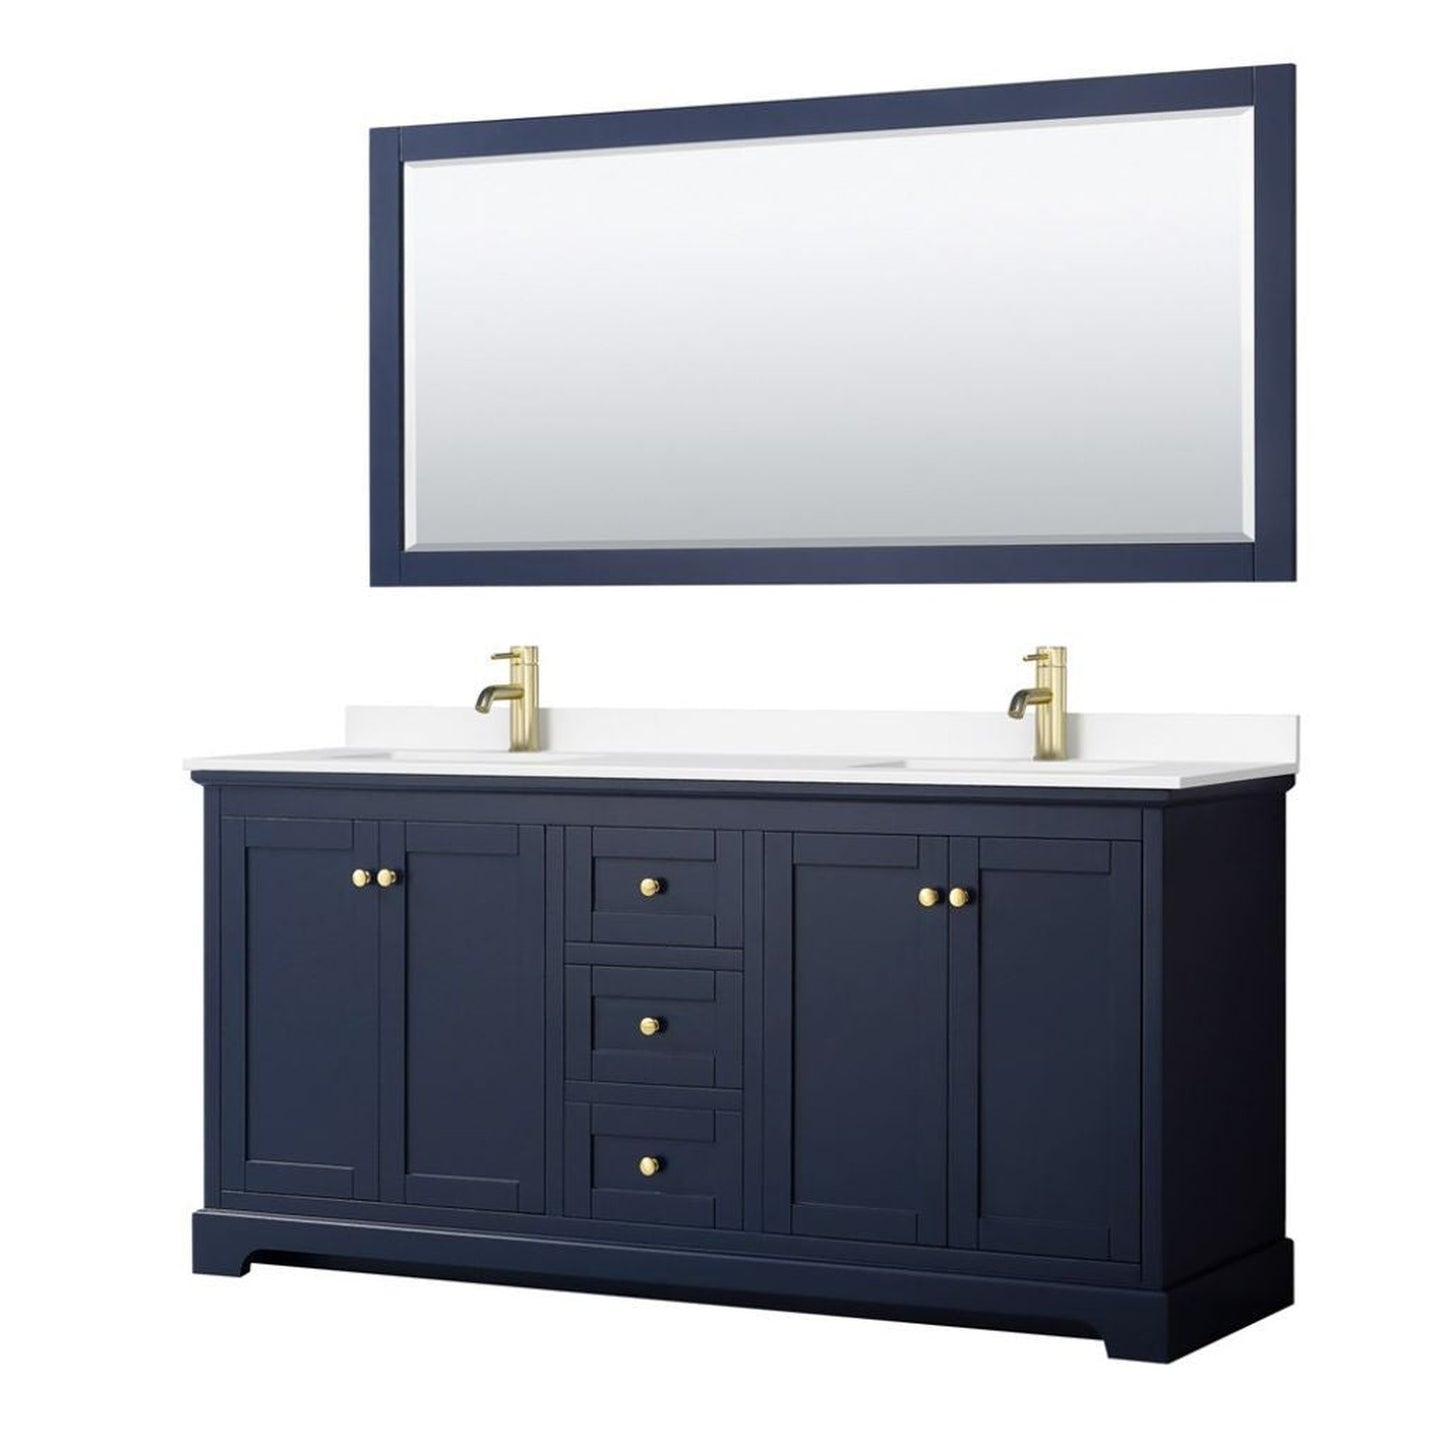 Wyndham Collection Avery 72" Dark Blue Double Bathroom Vanity Set With White Cultured Marble Countertop With 1-Hole Faucet And Square Sink And 70" Mirror